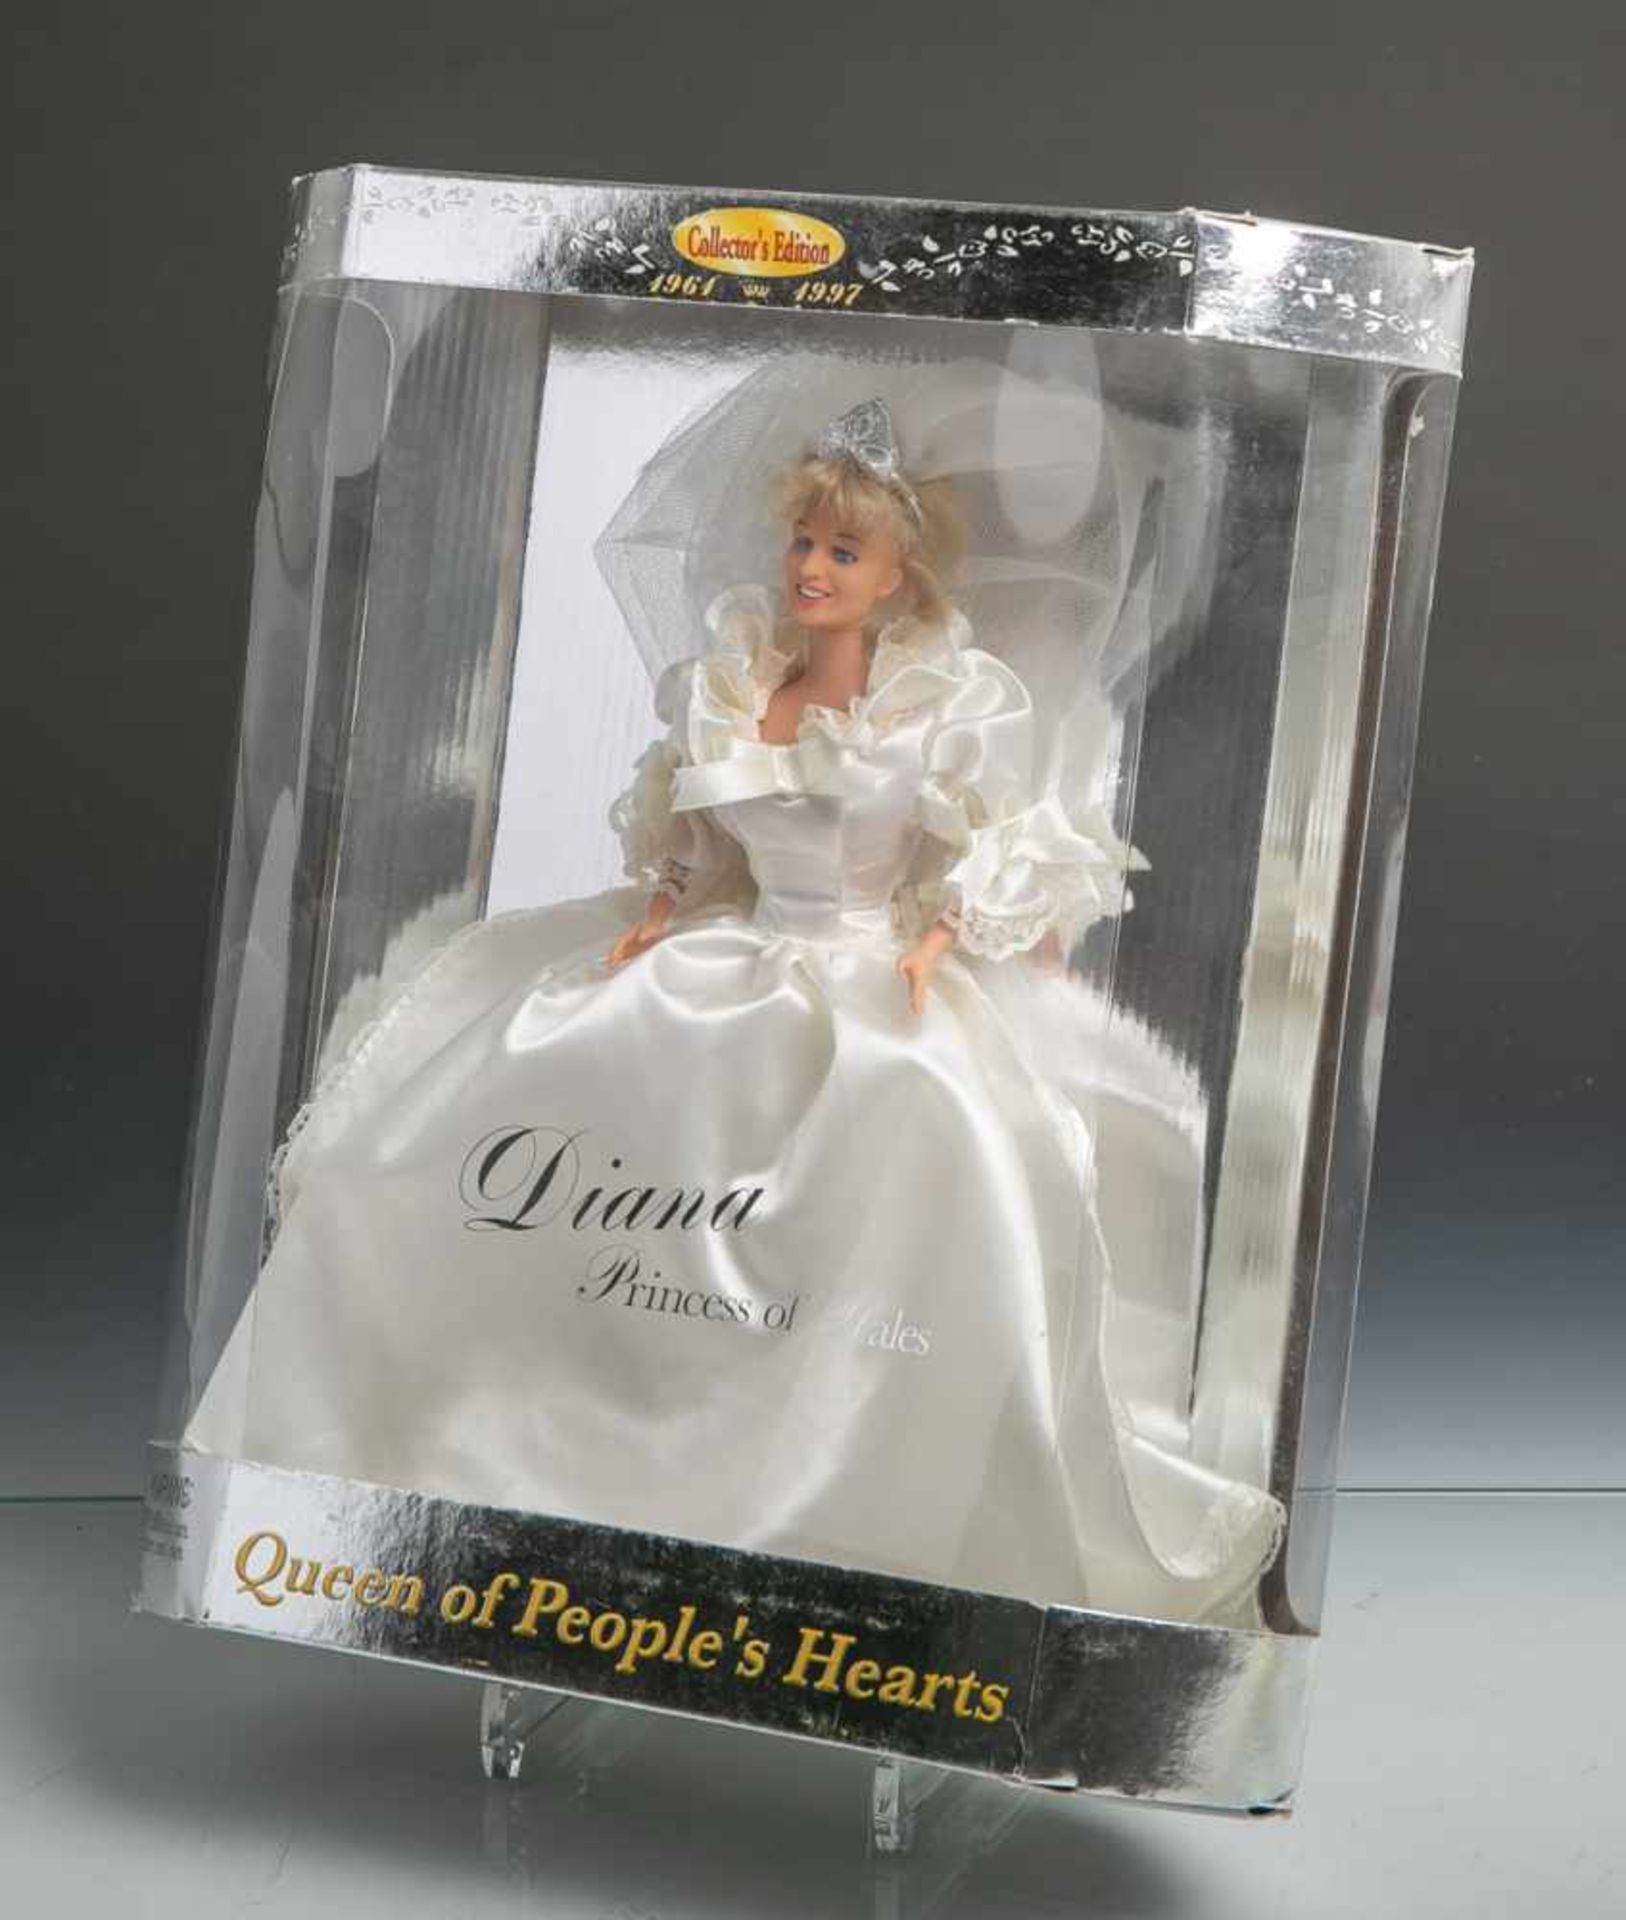 Promi-Puppe "Diana. Princess of Wales" (Street Players Holding Corp., 1997), Collector'sEdition,